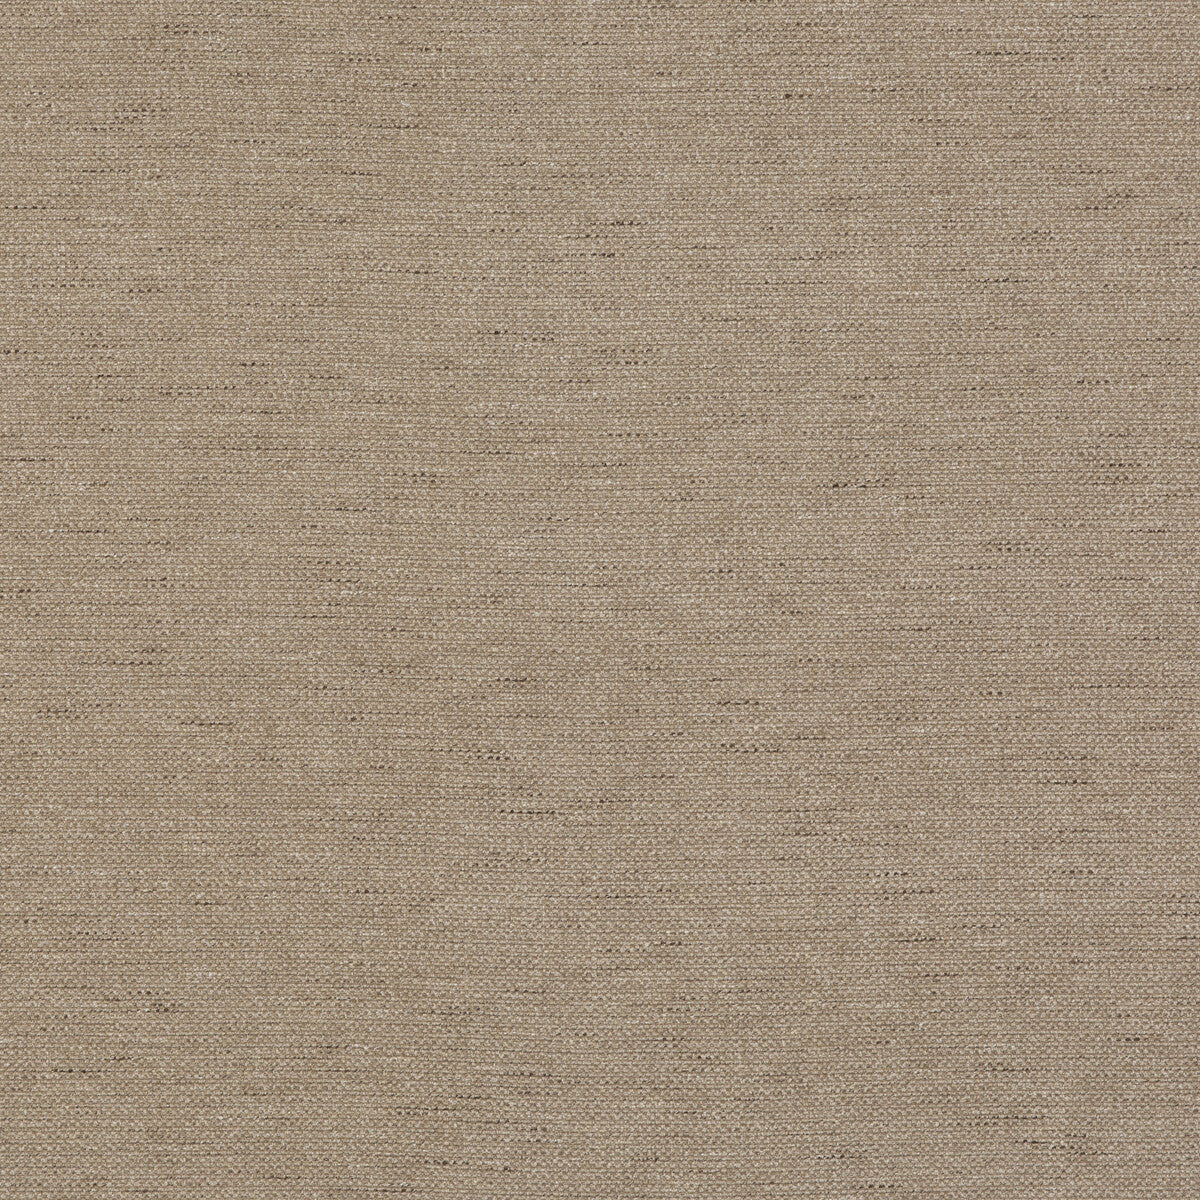 Pentridge fabric in nutmeg color - pattern BF10956.250.0 - by G P &amp; J Baker in the Baker House Textures collection